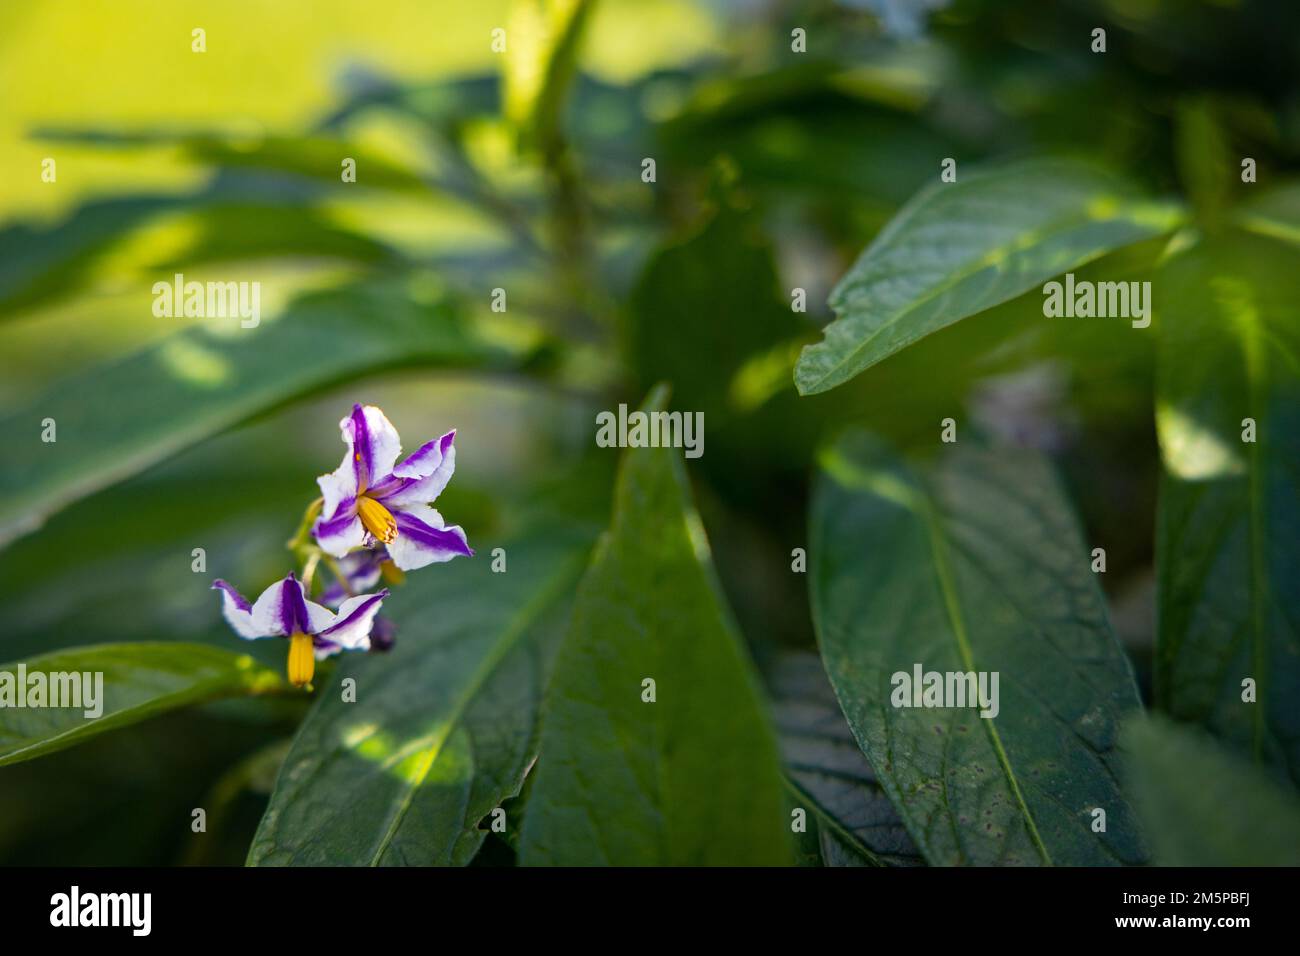 Blossom of Solanum muricatum, outdoors with lots of green leaves. Stock Photo